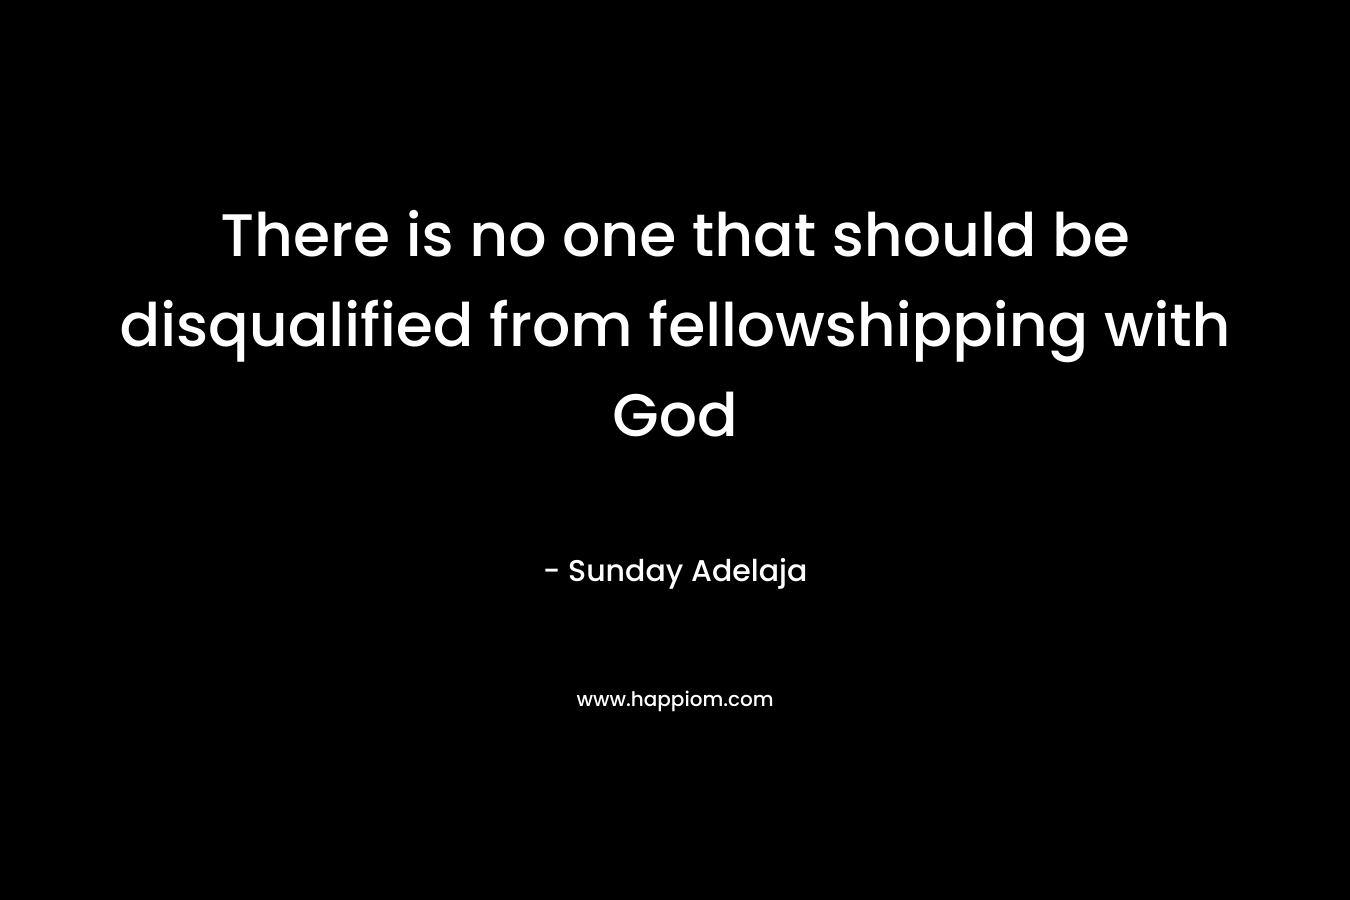 There is no one that should be disqualified from fellowshipping with God